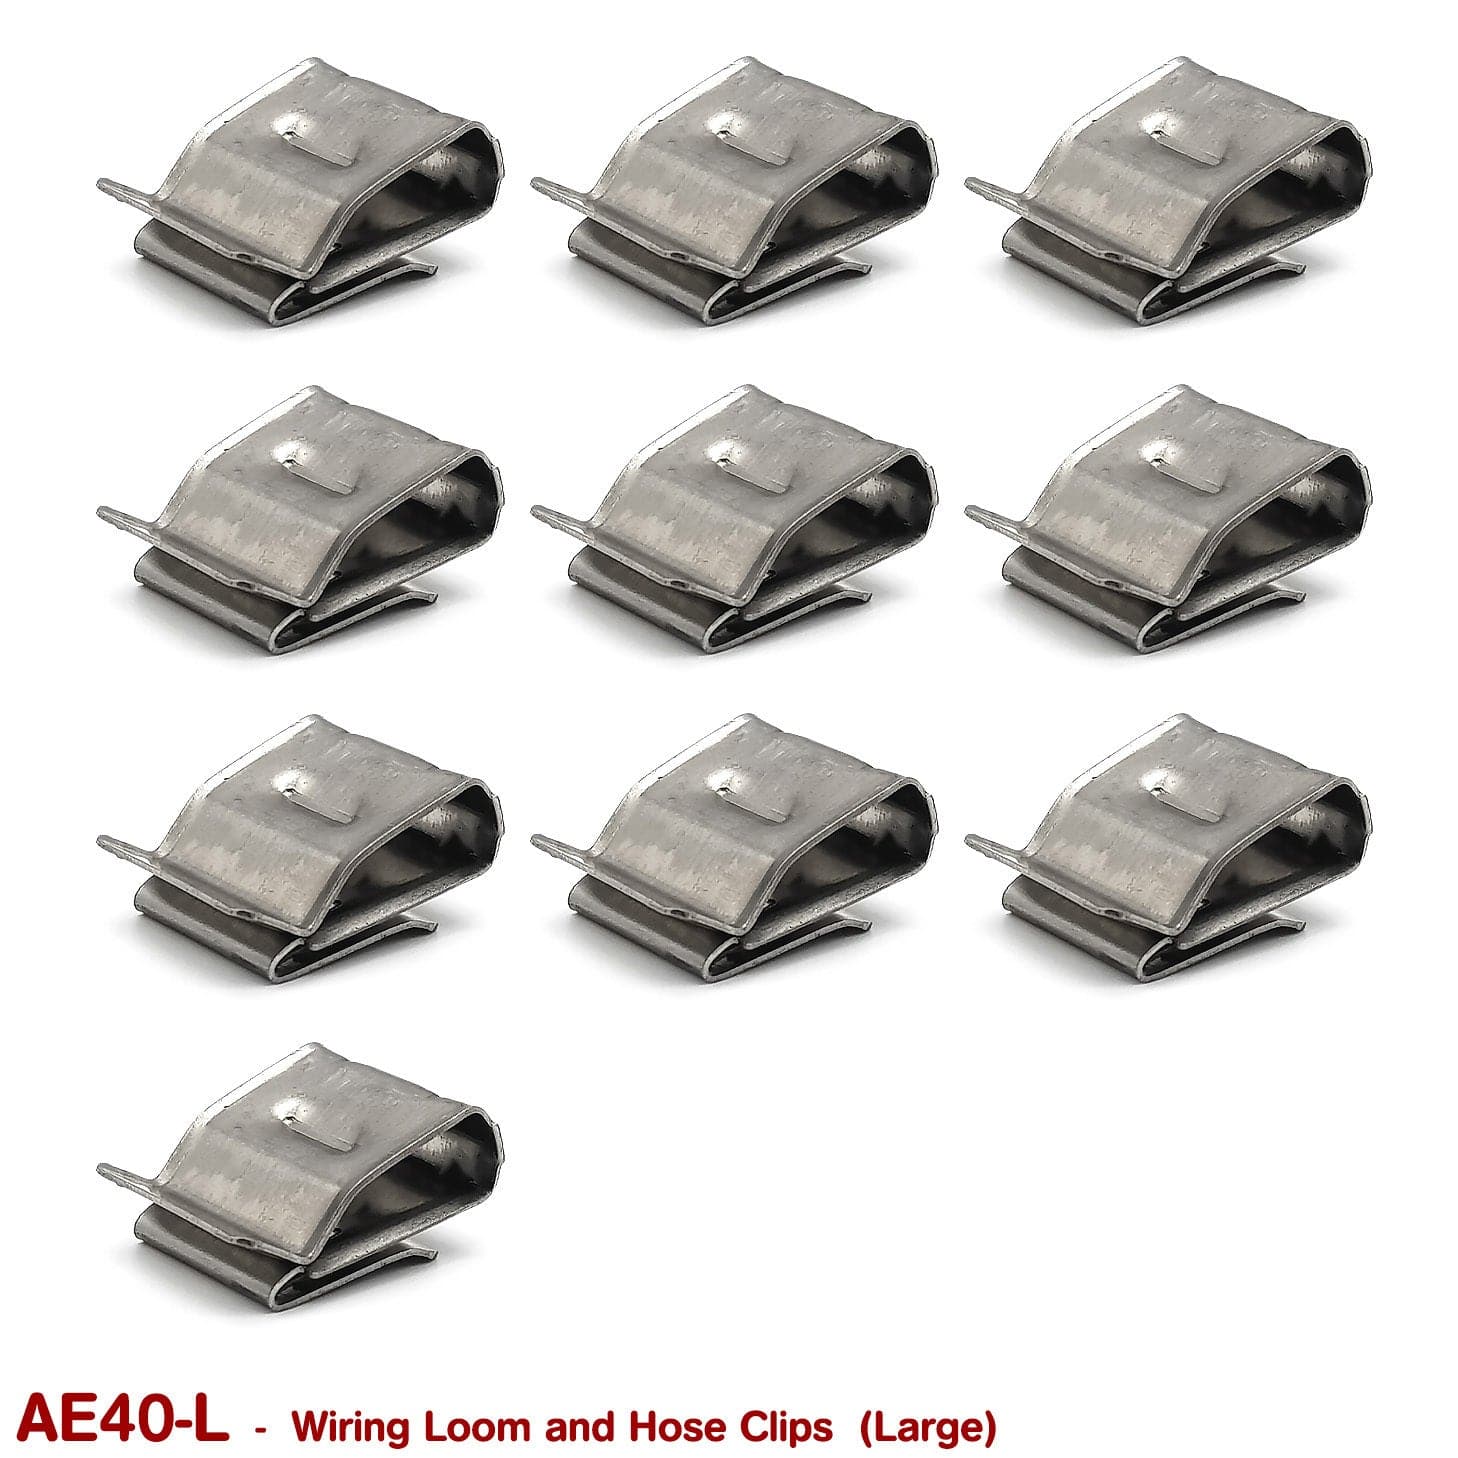 WIRING LOOM and HOSE CLIPS - LARGE